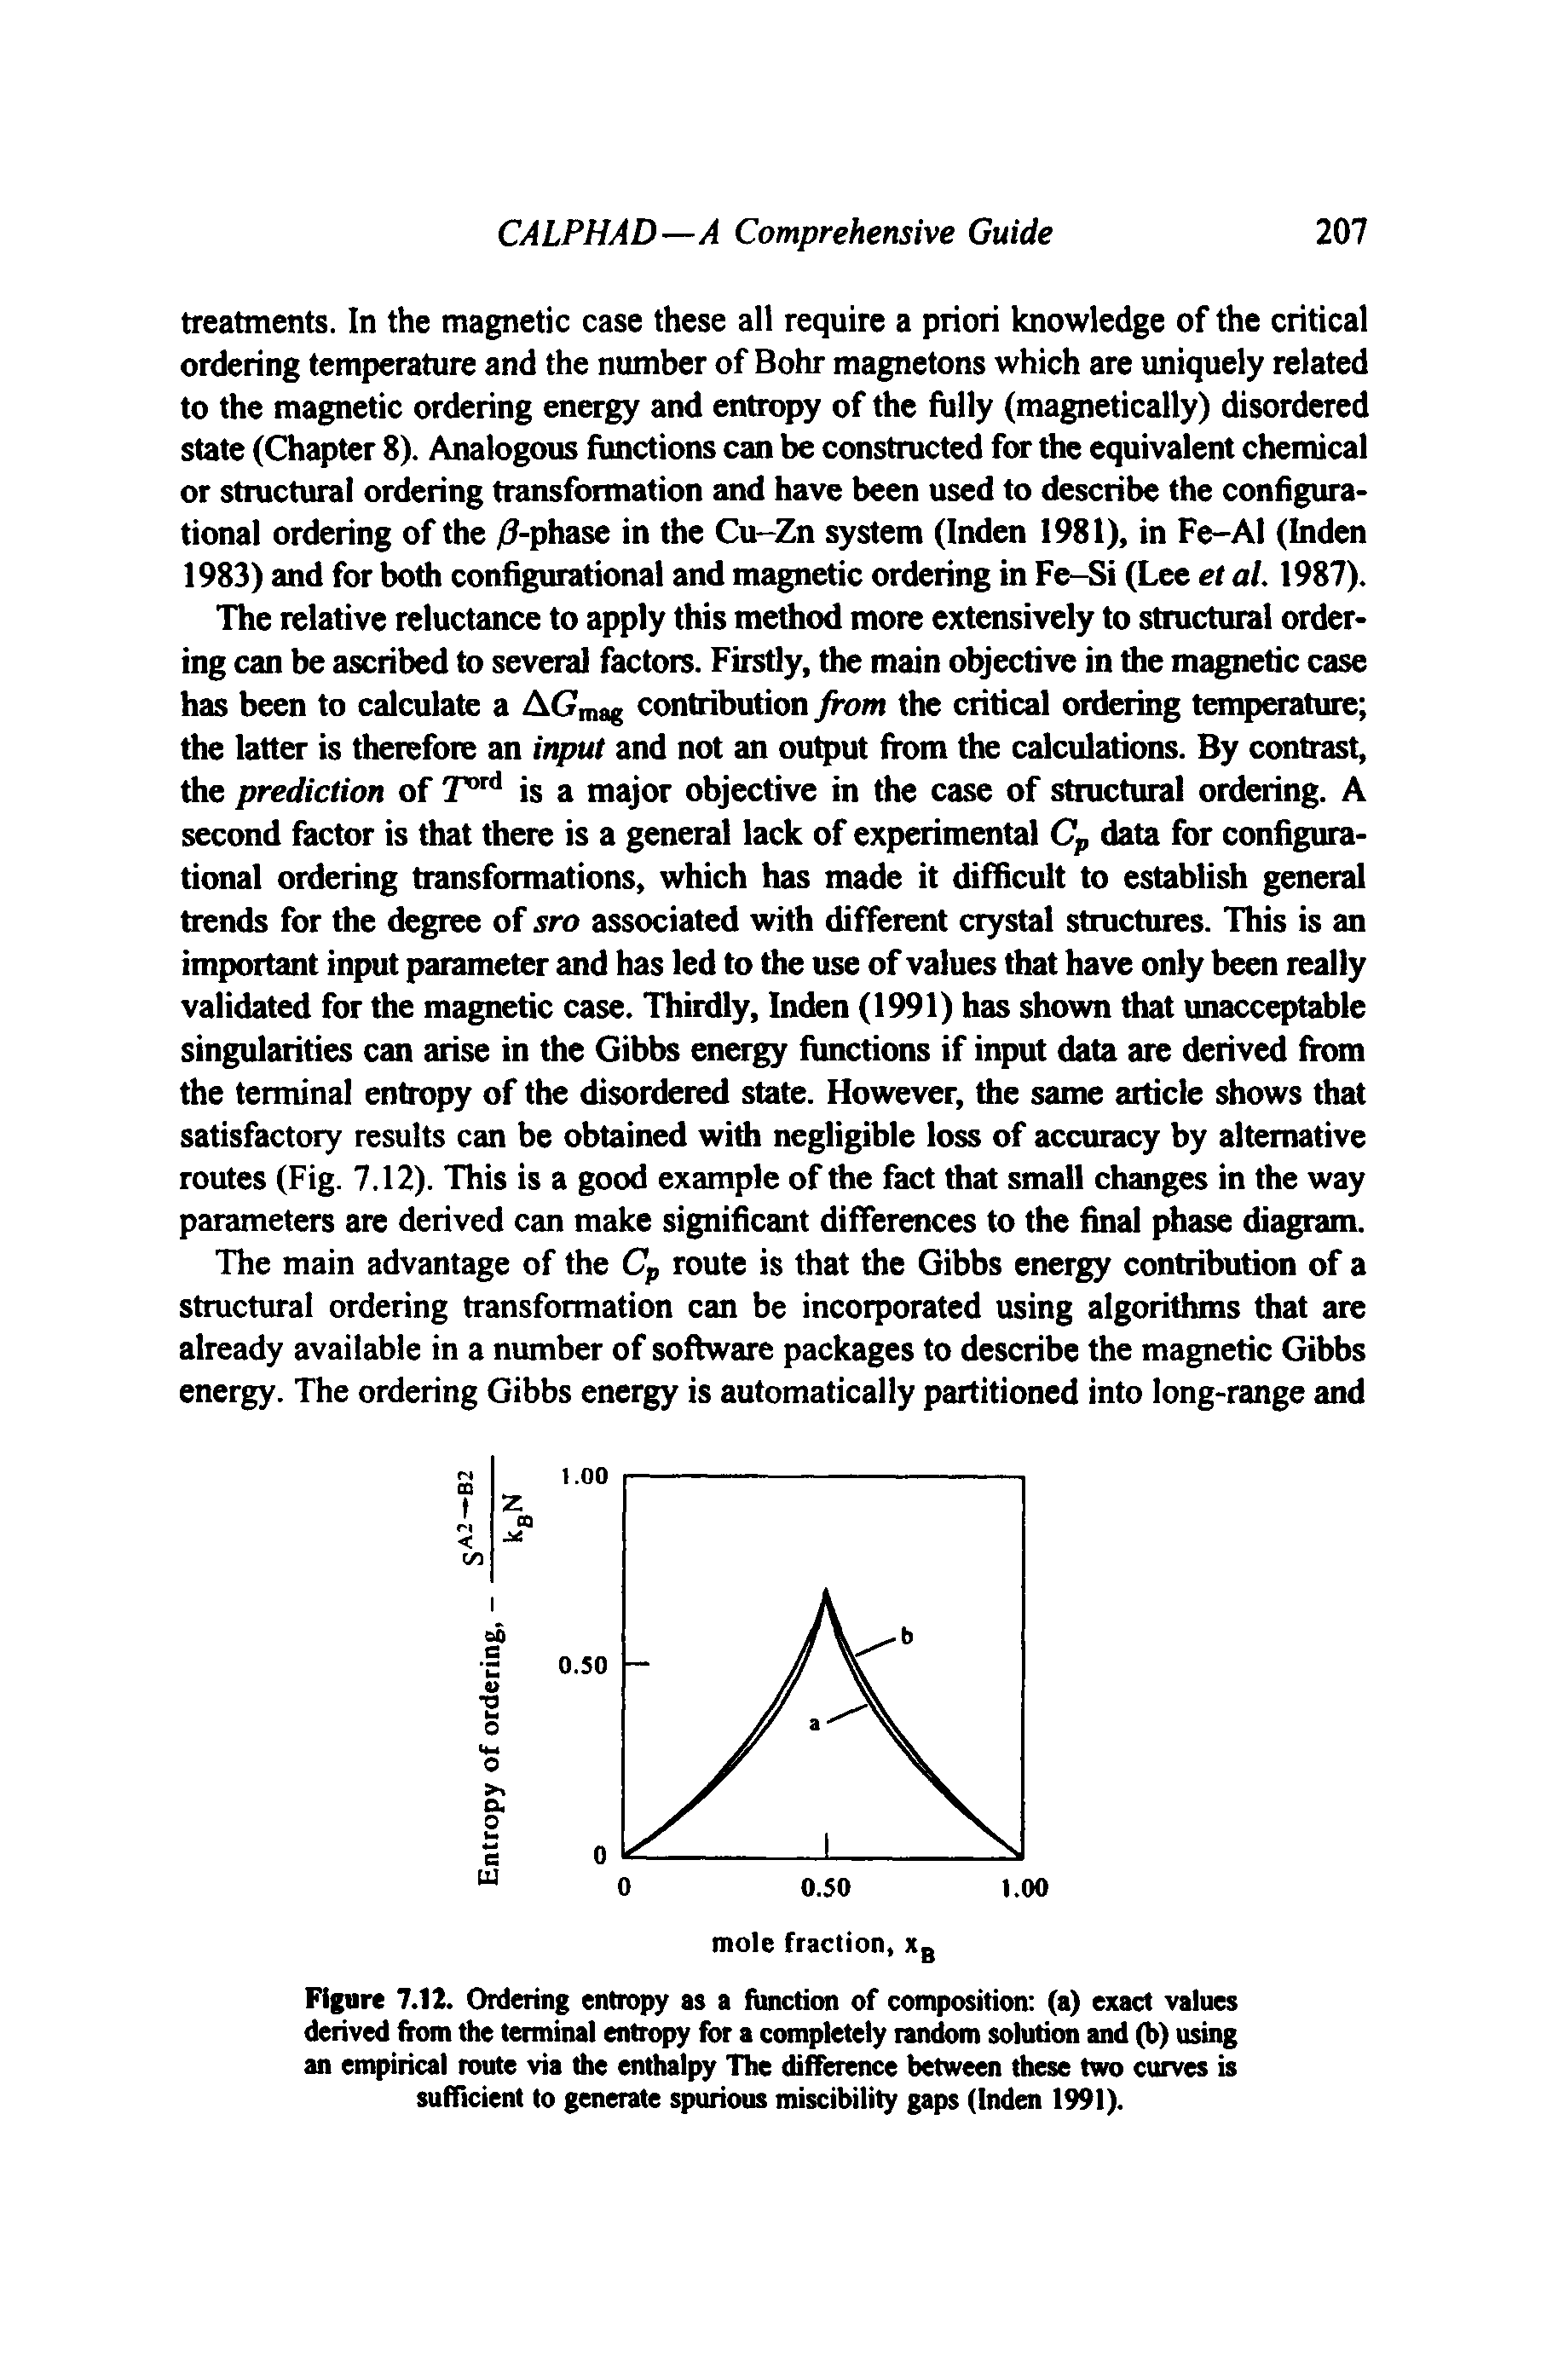 Figure 7.12. Ordering entropy as a function of composition (a) exact values derived from the terminal entropy for a completely random solution and (b) using an empirical route via the entinipy The difference between these two curves is sufficient to generate spurious miscibility gaps (Inden 1991).